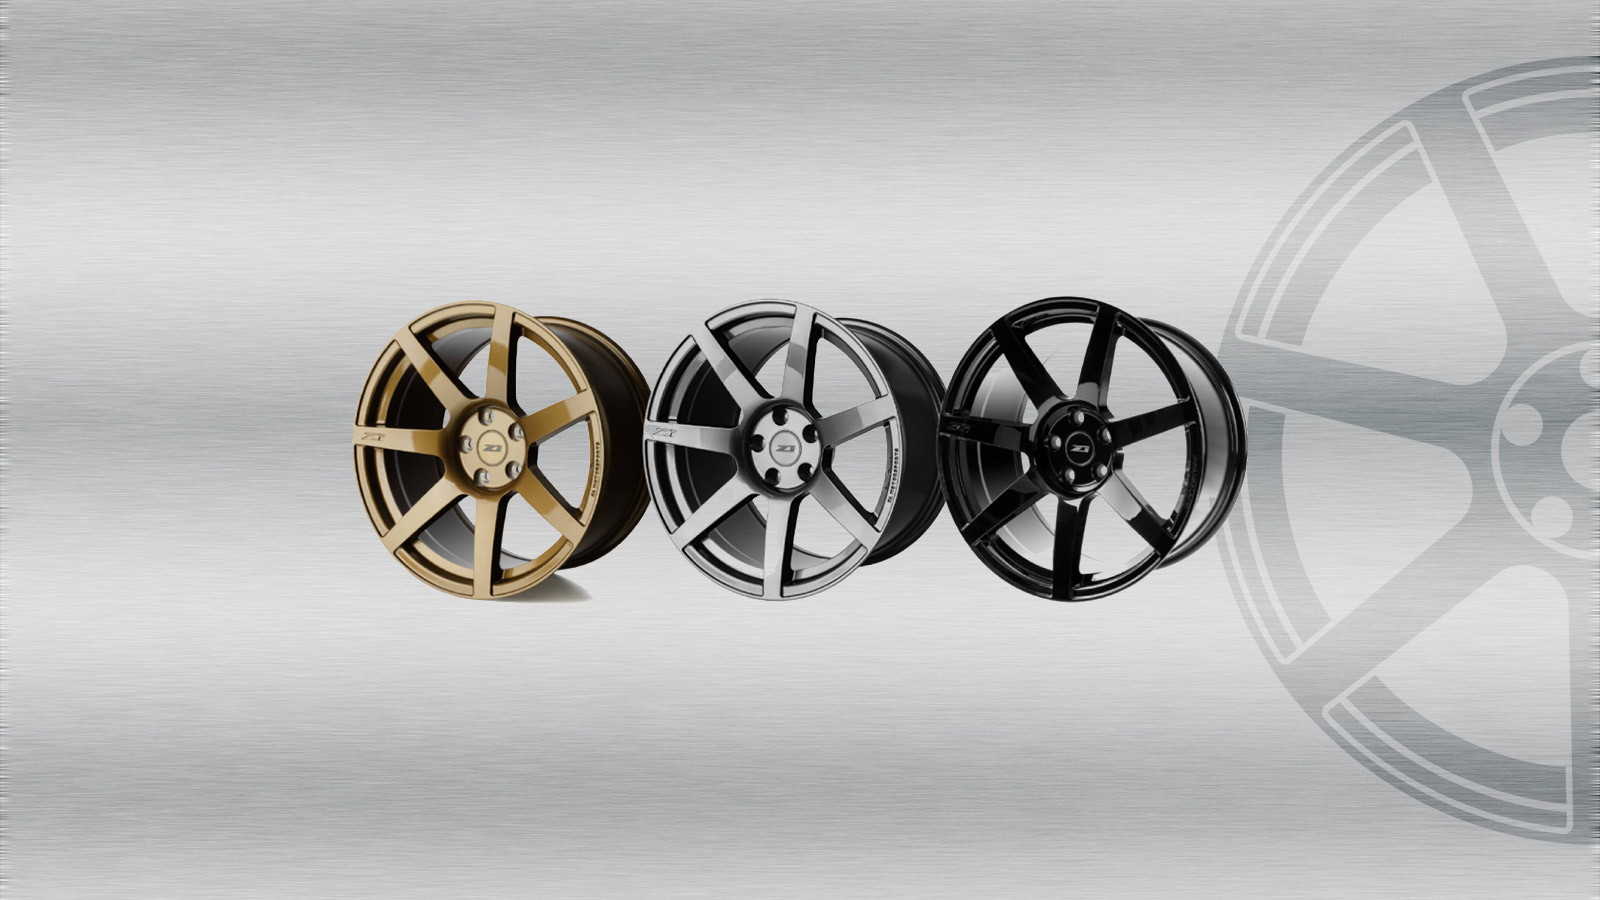 ZM-23 WHEELS The lightweight flow-formed wheel designed specifically for your 350Z